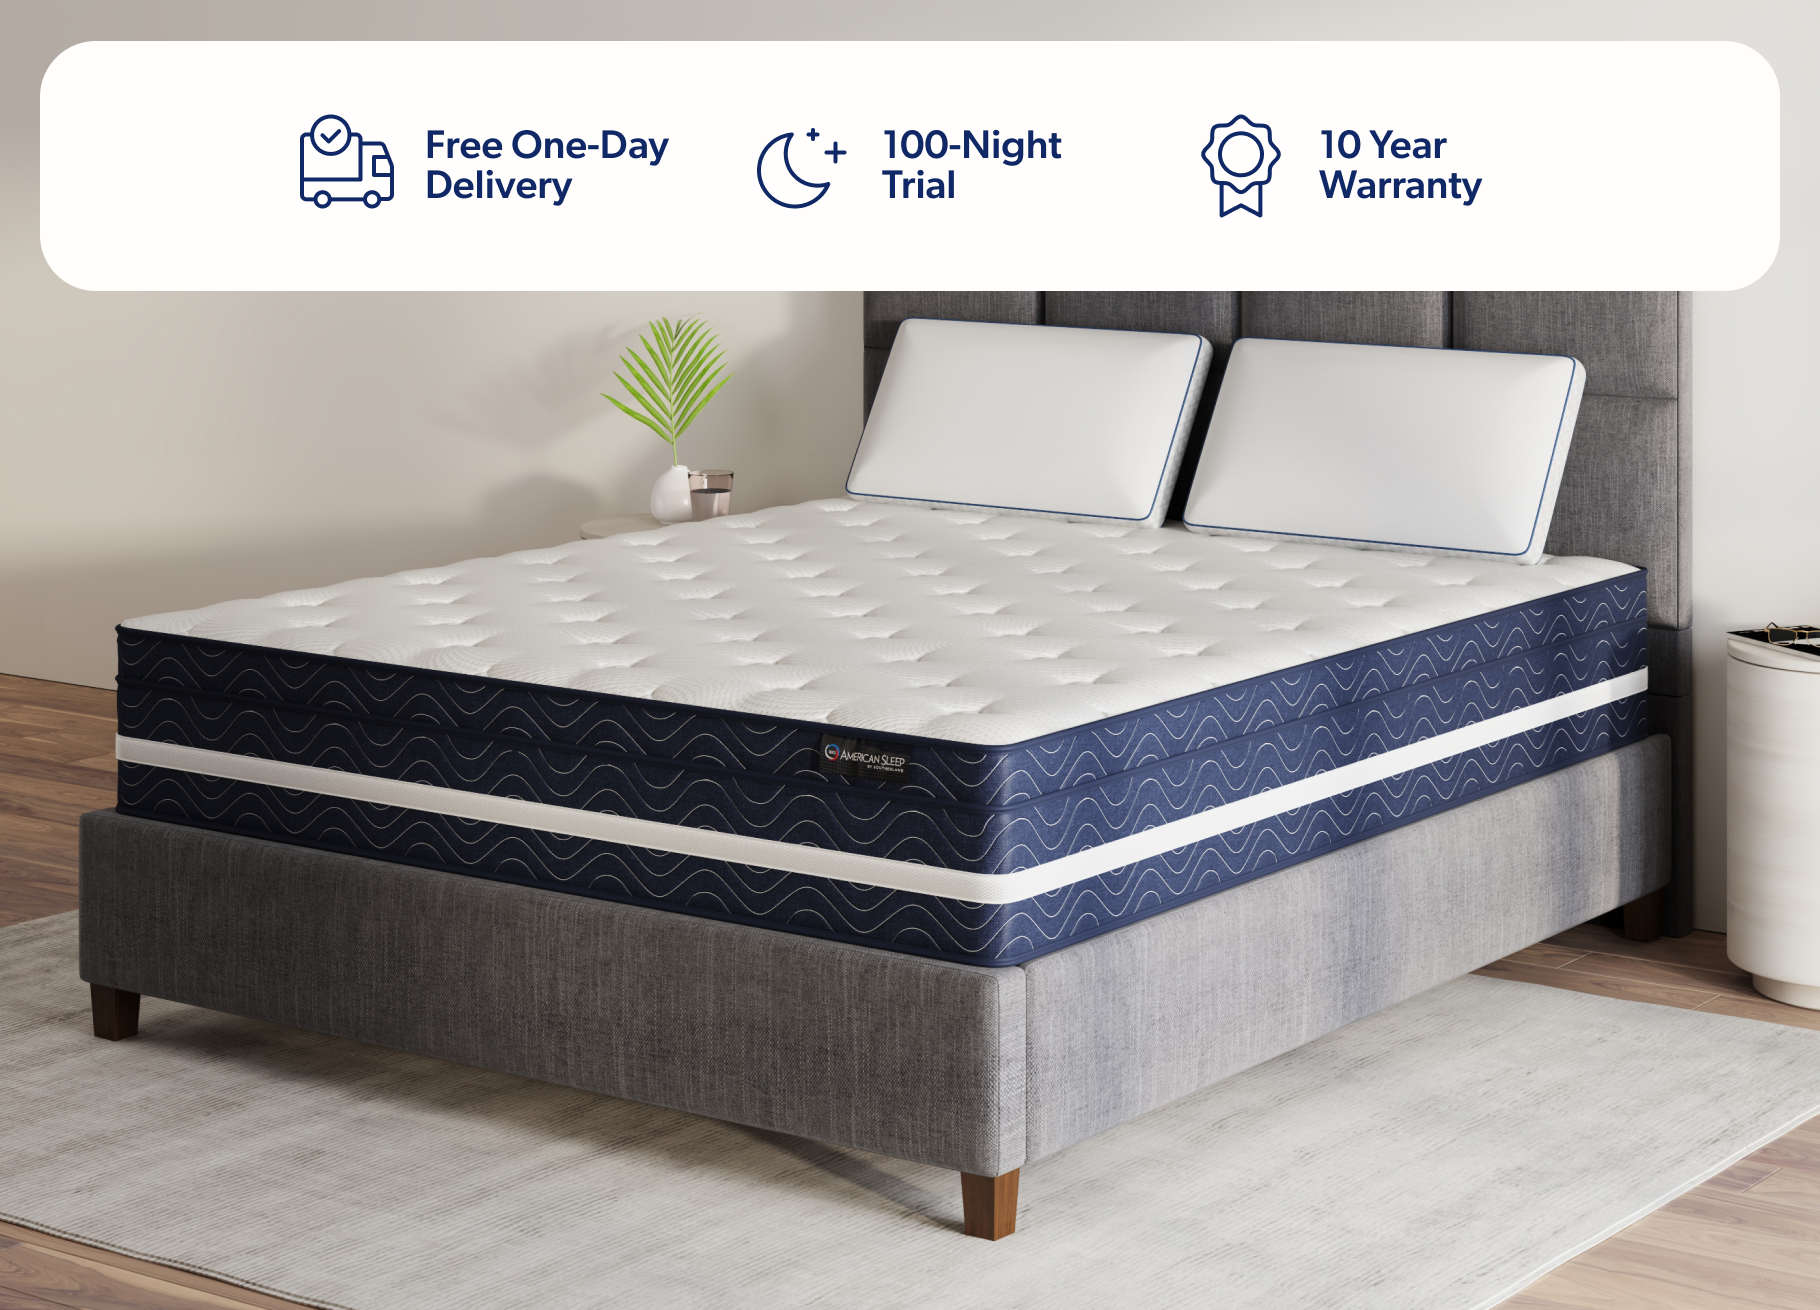 Shop Queen Size Mattresses - Free Shipping & 100 Night Trial